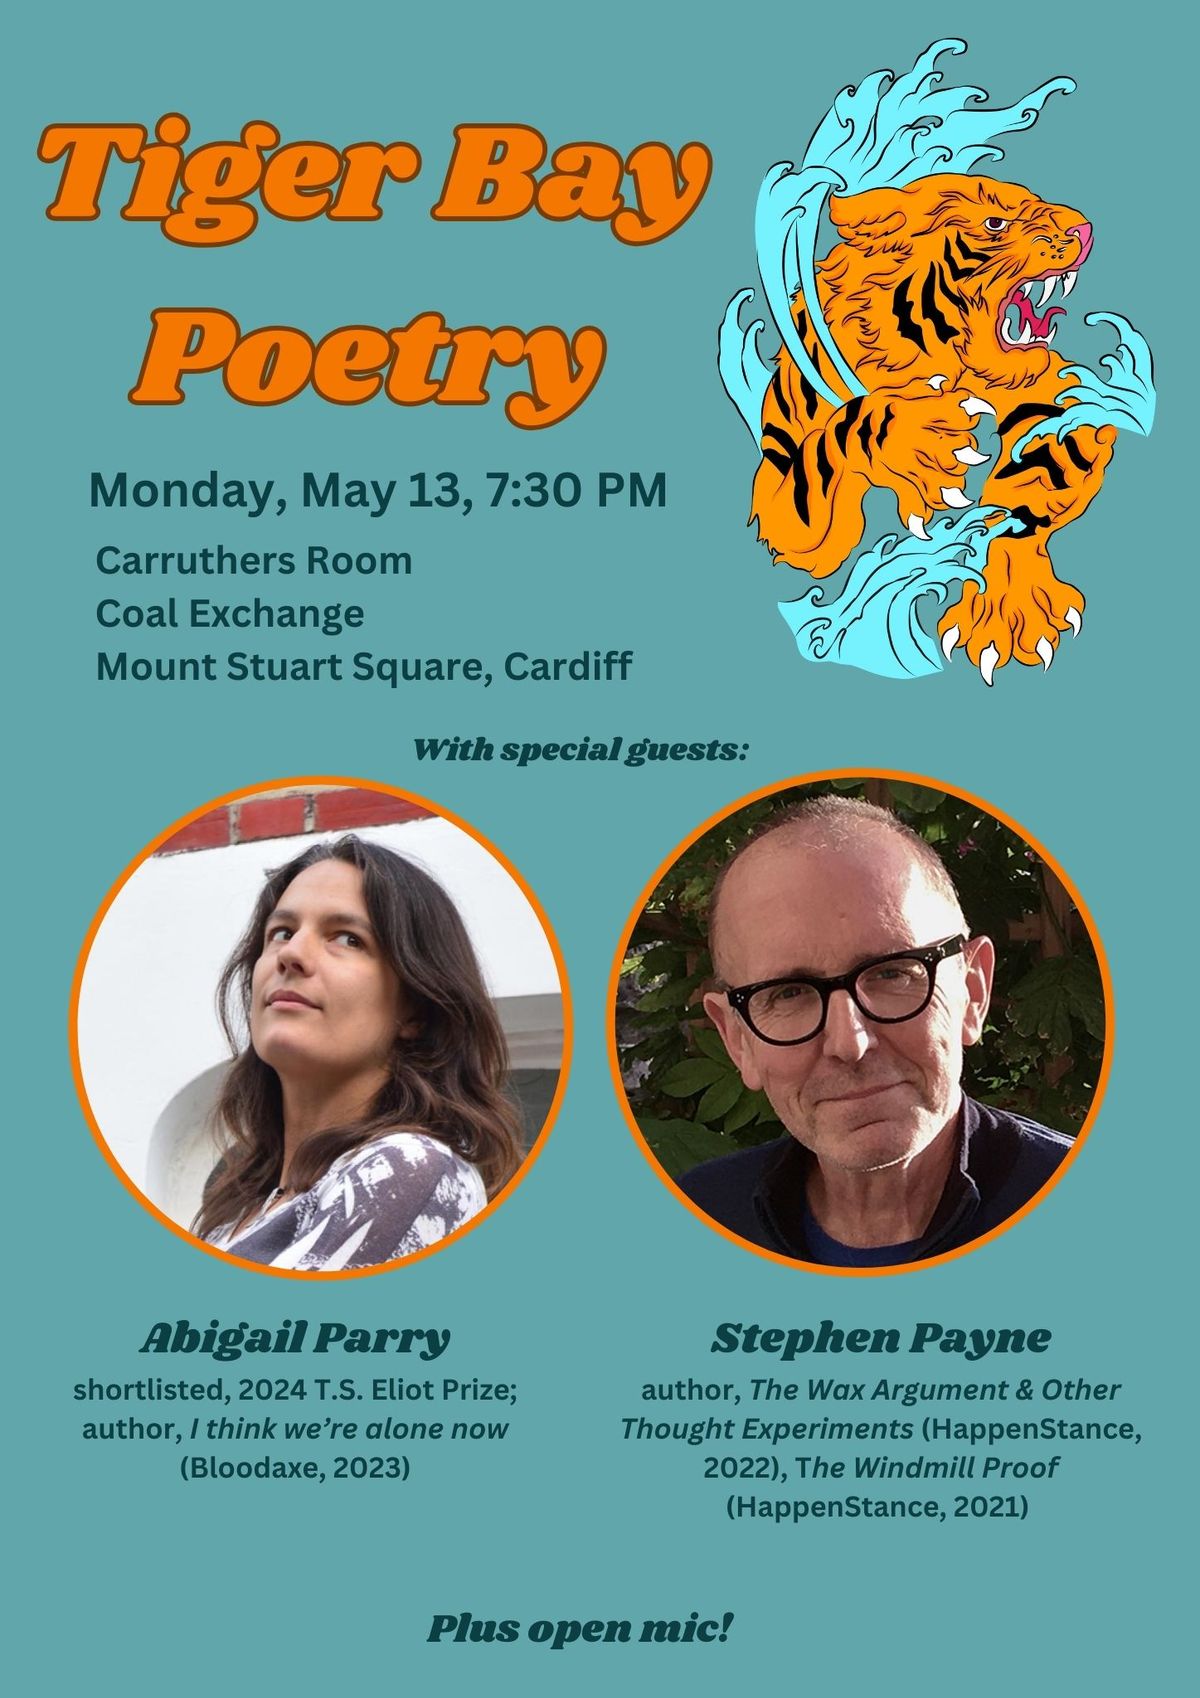 Tiger Bay Poetry with Abigail Parry and Stephen Payne